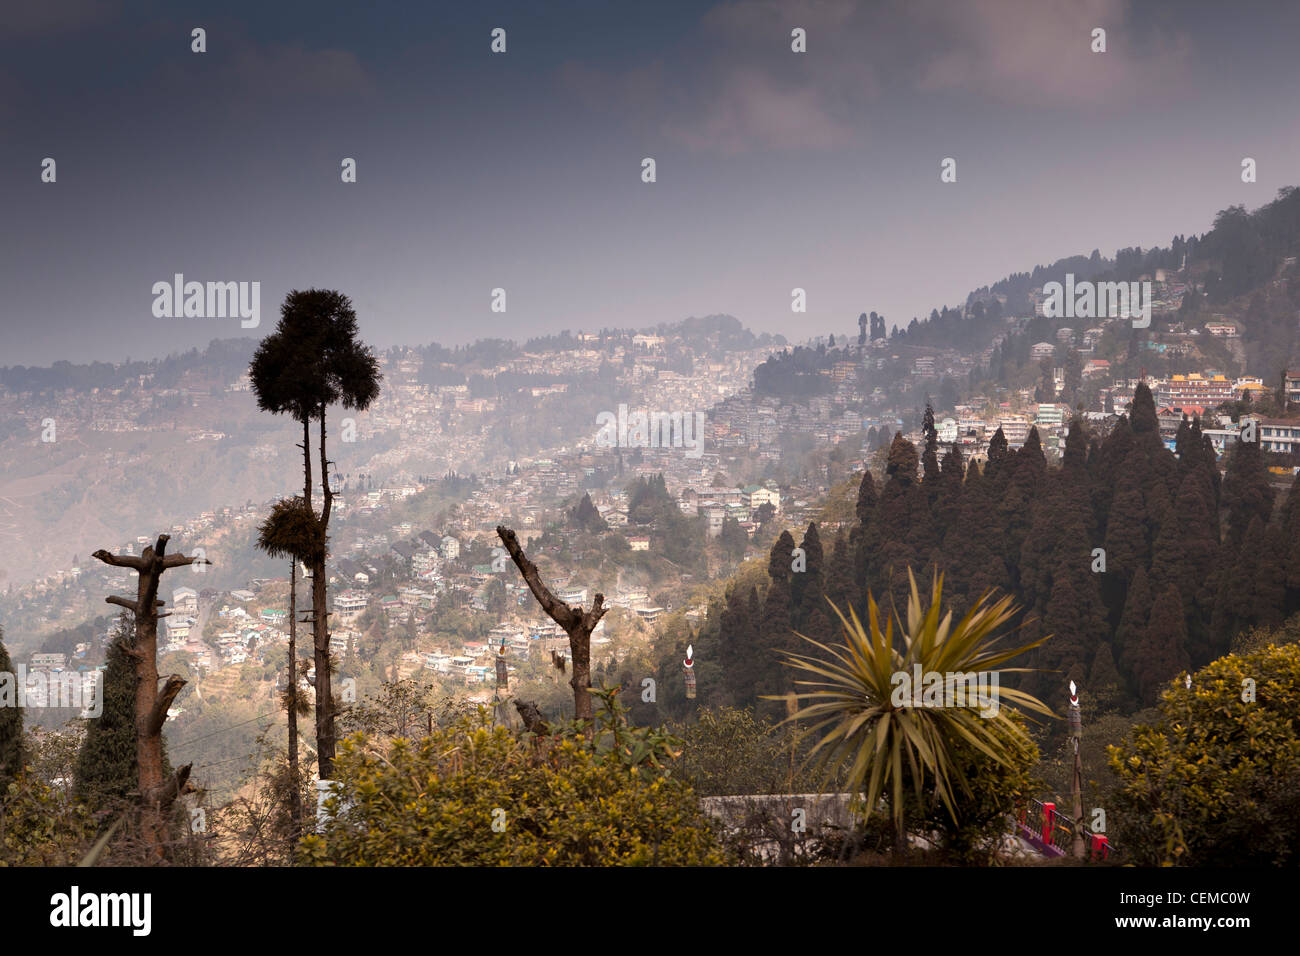 India, West Bengal, Darjeeling, Himalayan hillstation town skyline from Ghoom Stock Photo